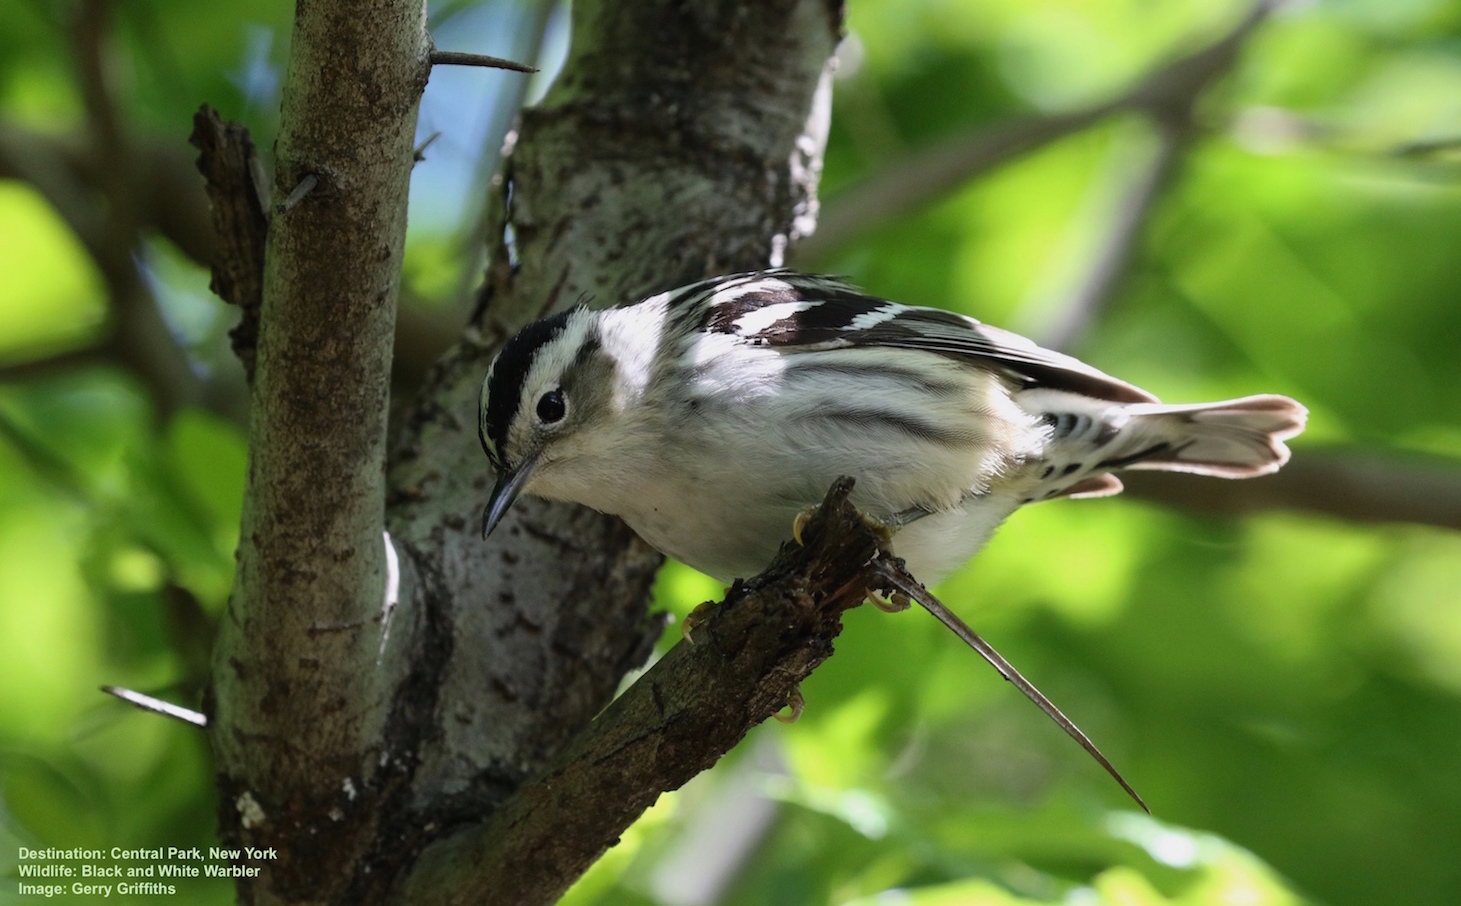 How to Find Warblers & Make Friends in the Hudson River Valley